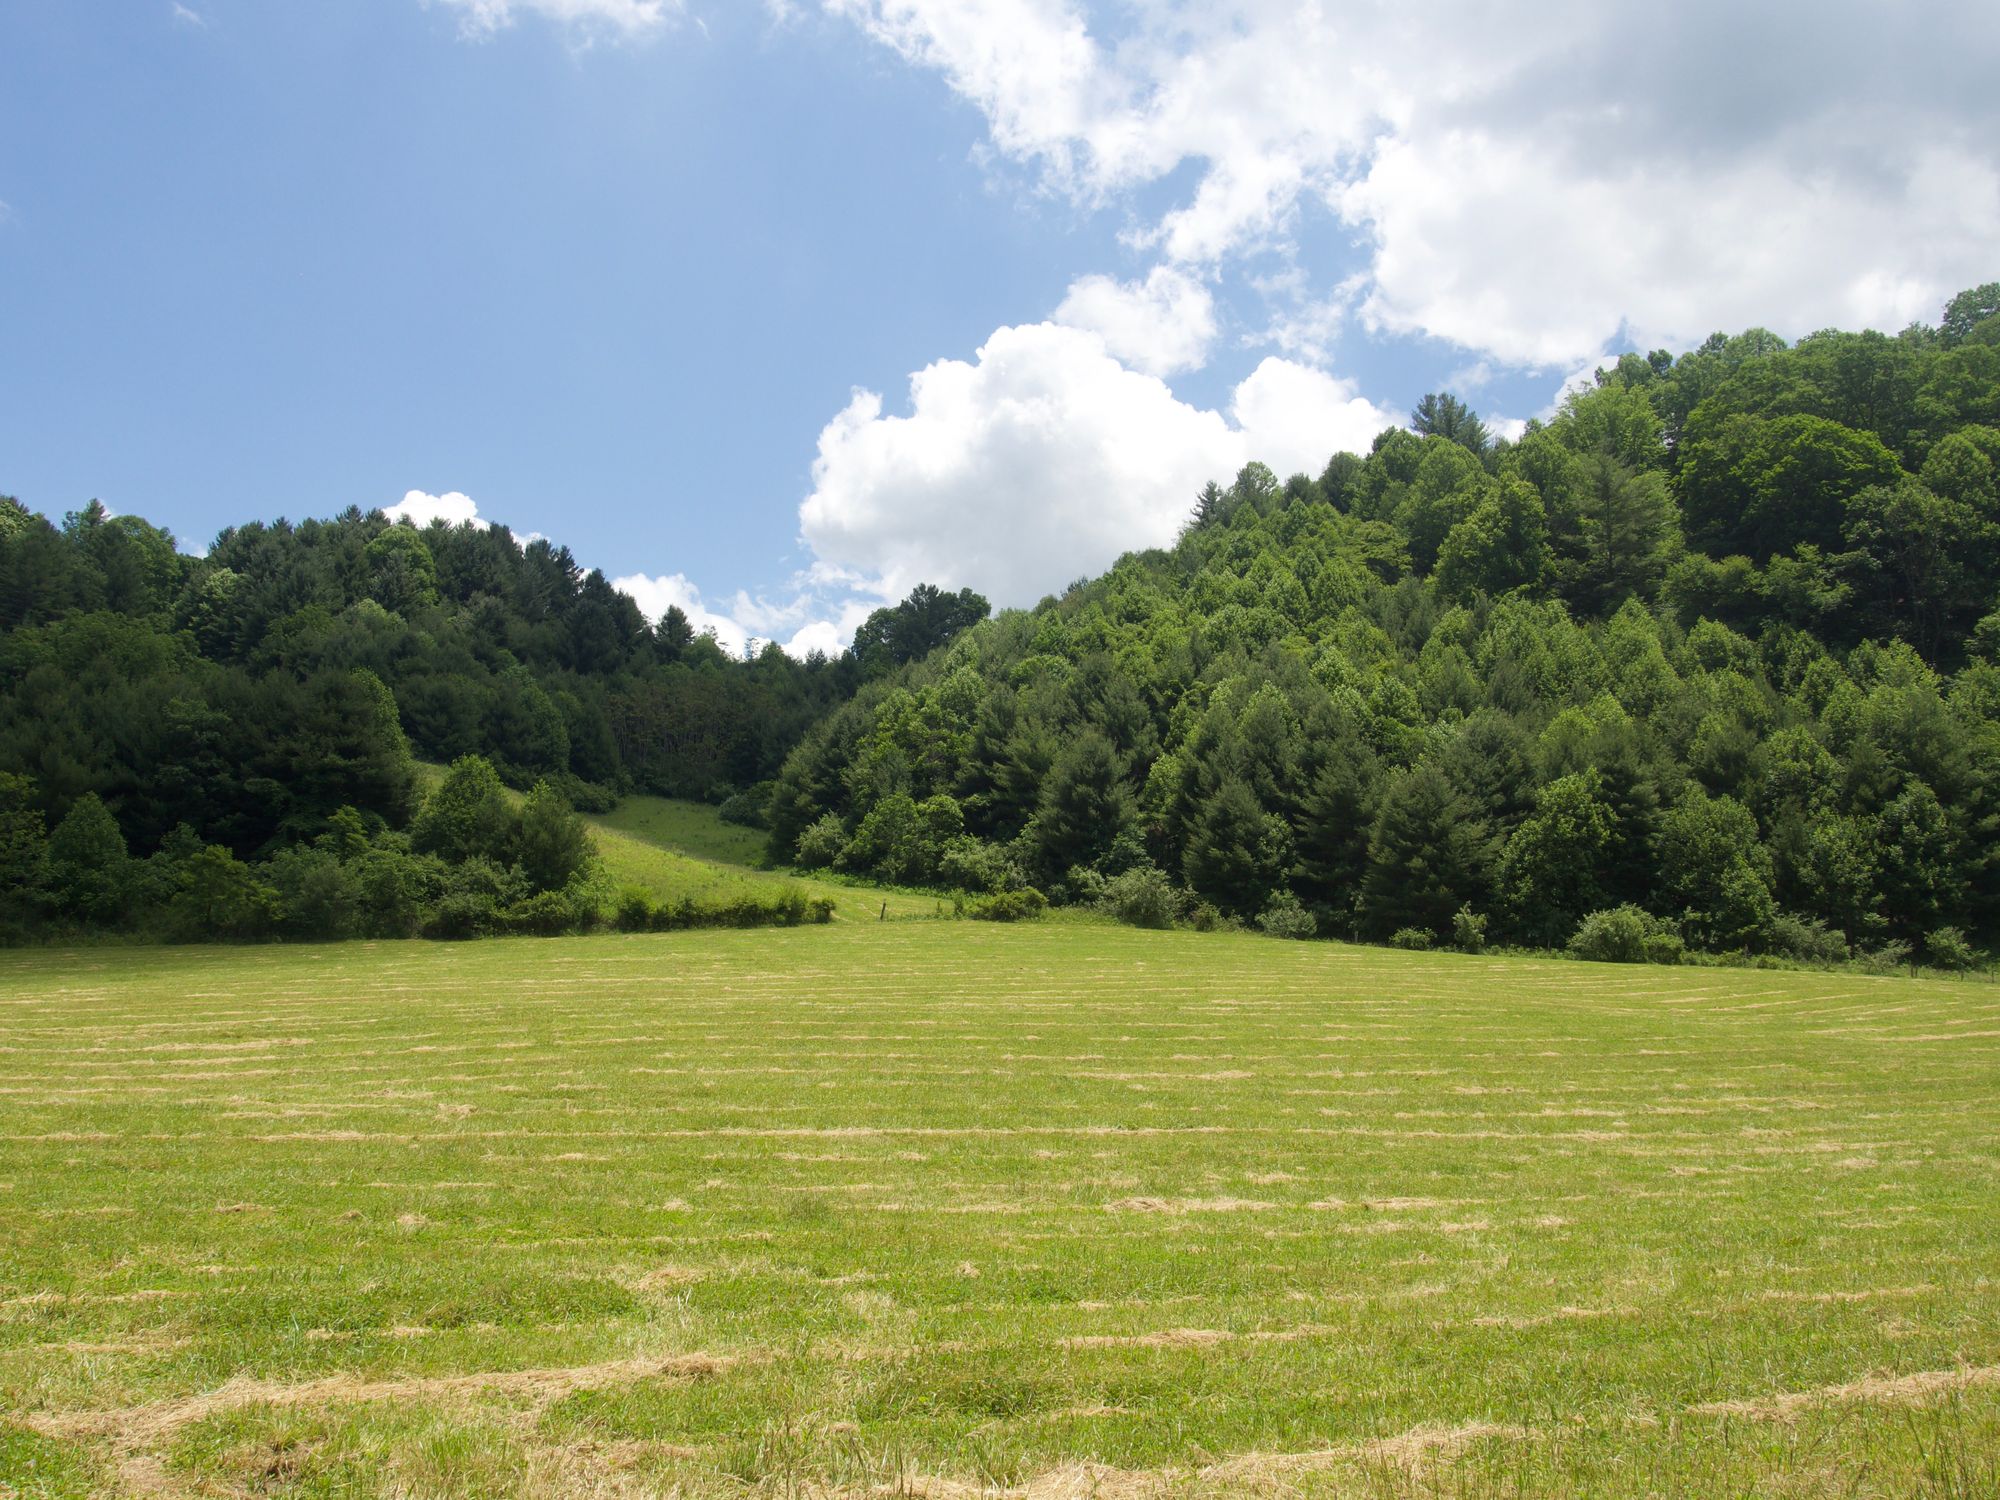 Grassy green field with hills covered in pine trees in the background.